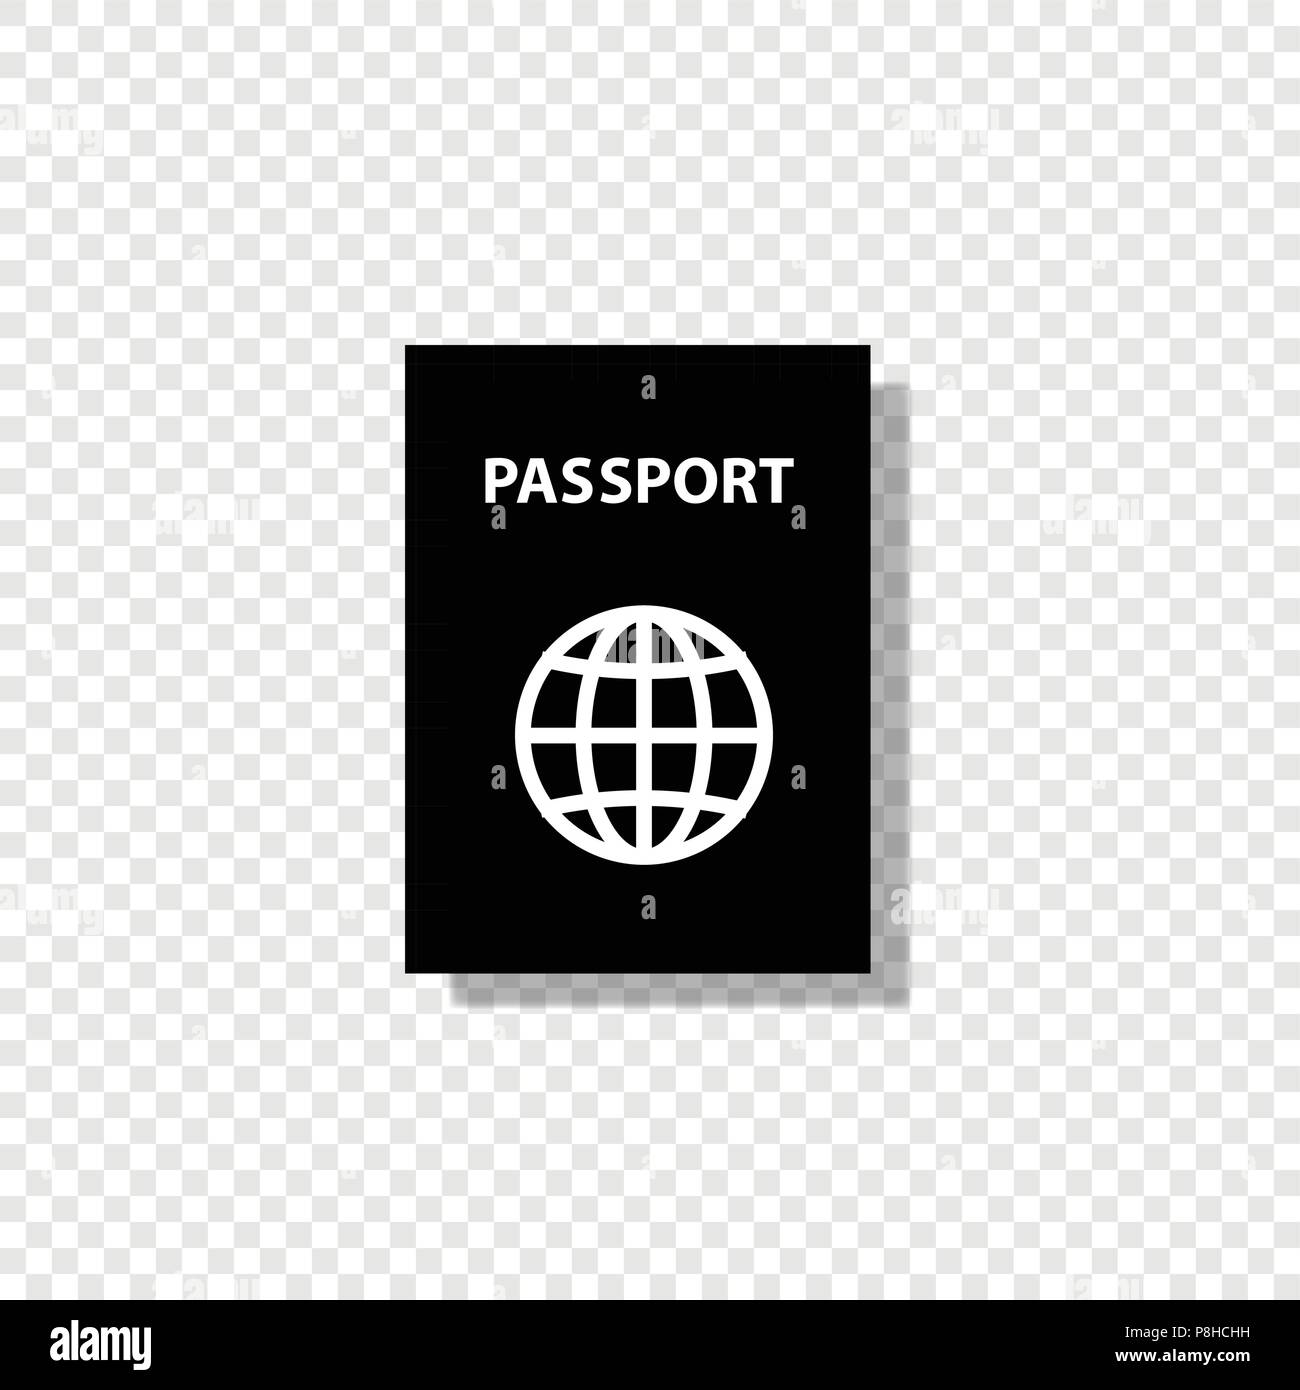 Vector black and white silhouette illustration of passport document icon isolated on transparent background. Stock Vector